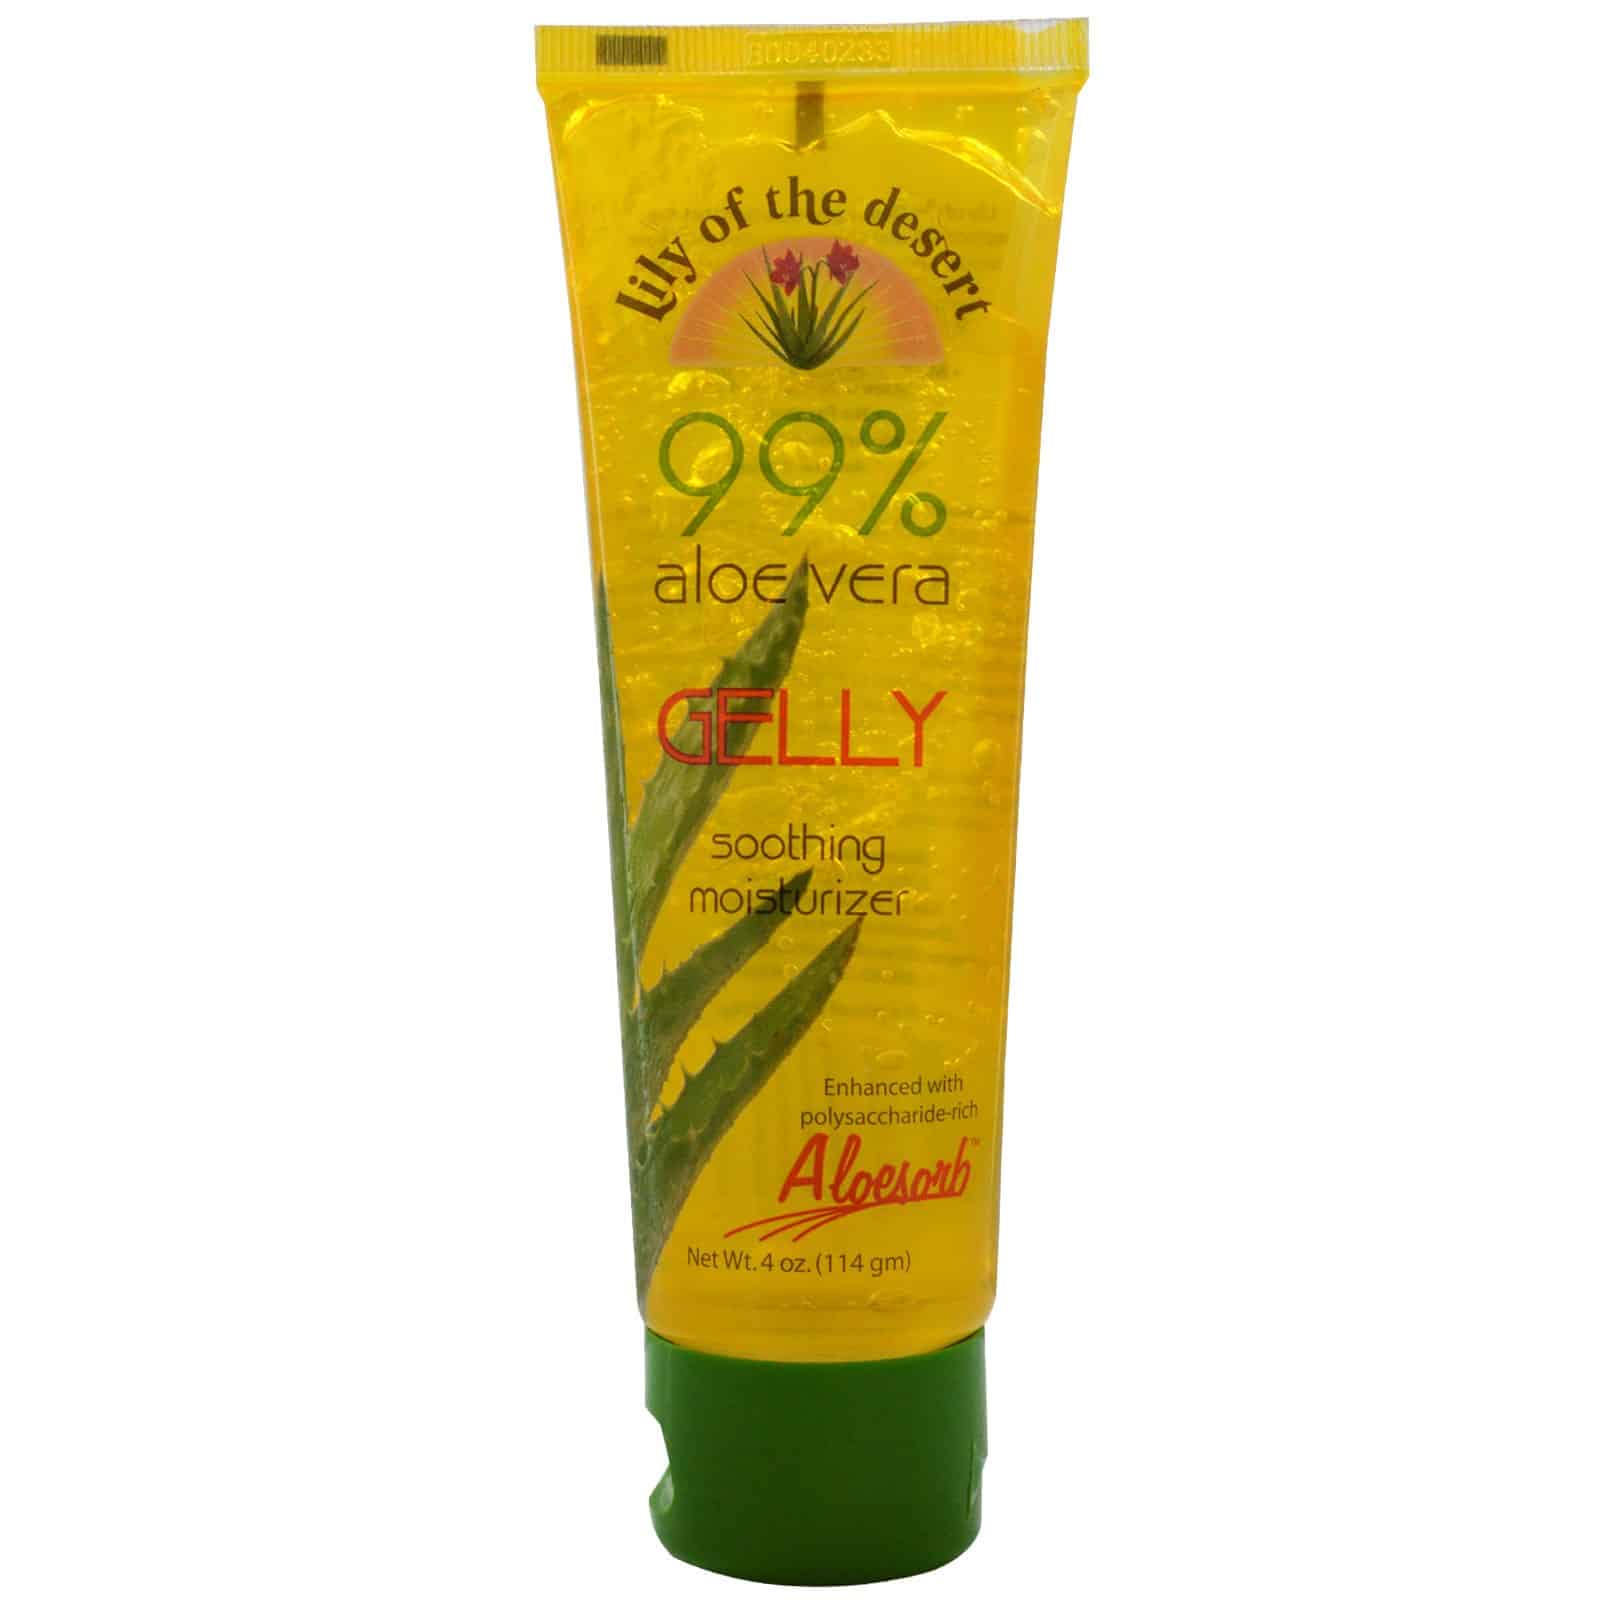 Can Aloe Vera Relieve Eczema? I Test It Out